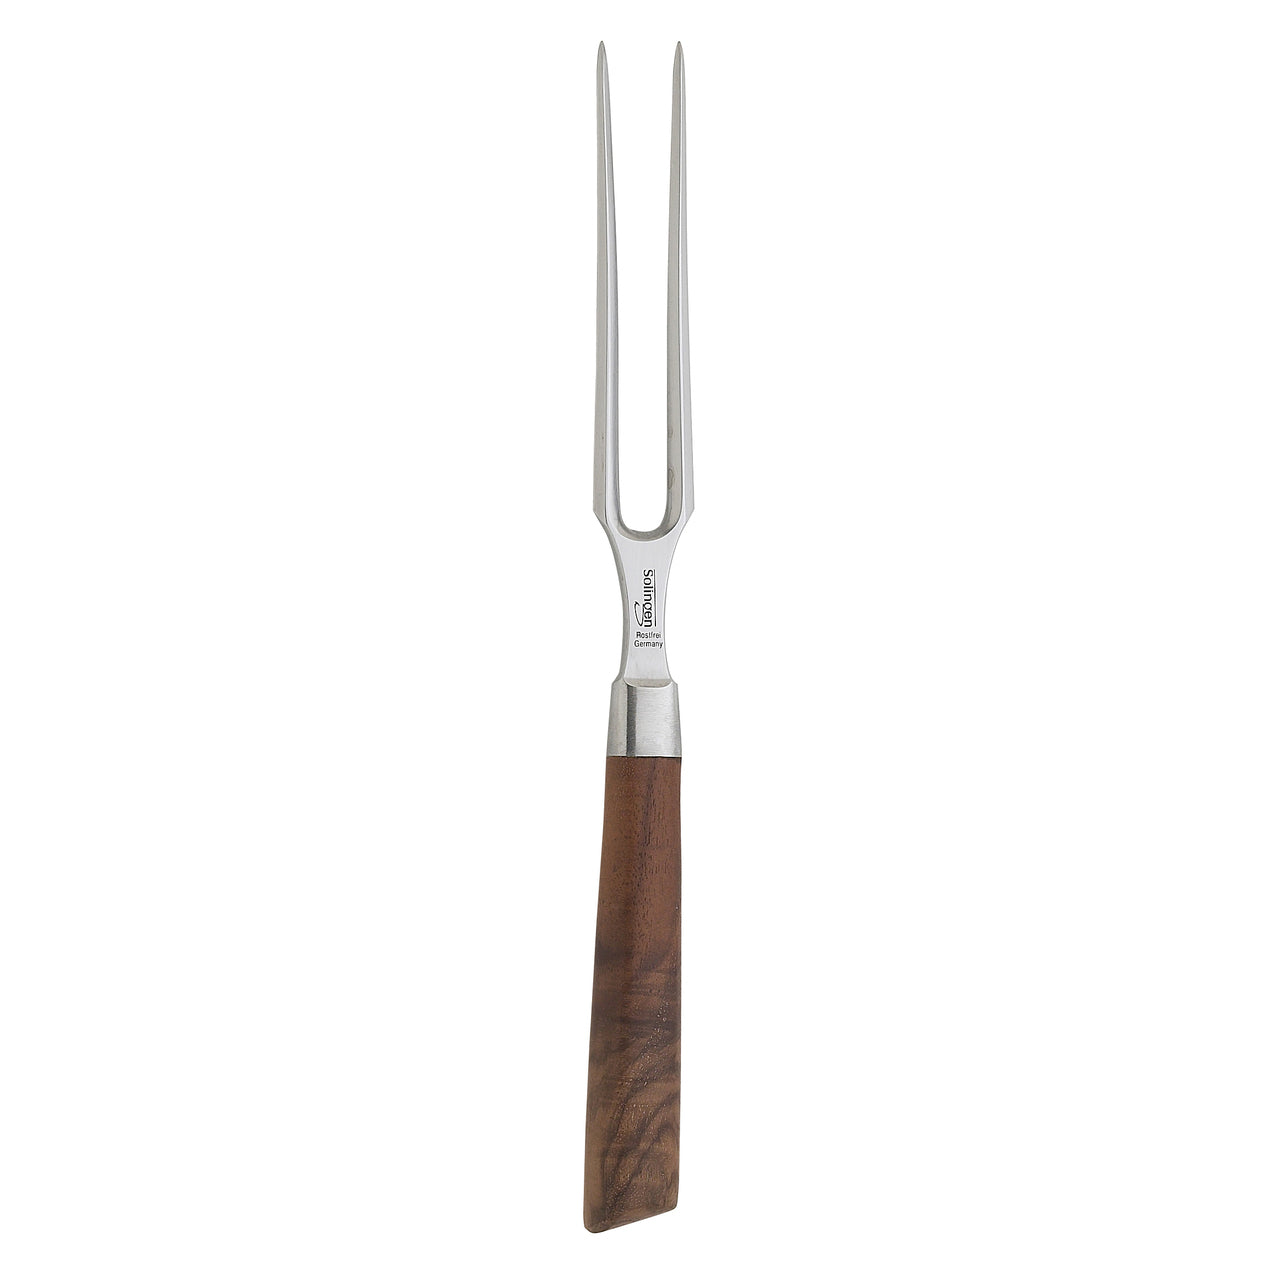 BEON.COM.AU E9000 2KS         Royal Elite 2 Piece Kullenschliff Carving Set The Messermeister Royale Elité Carving Set consists of an 8 Inch Kullenschliff Carving Knife (E9688 8K) and a 6 Inch Straight Carving Fork (E9805 6). This is the perfect addition to your cutlery collection. Impress your guests by car... Messermeister at BEON.COM.AU